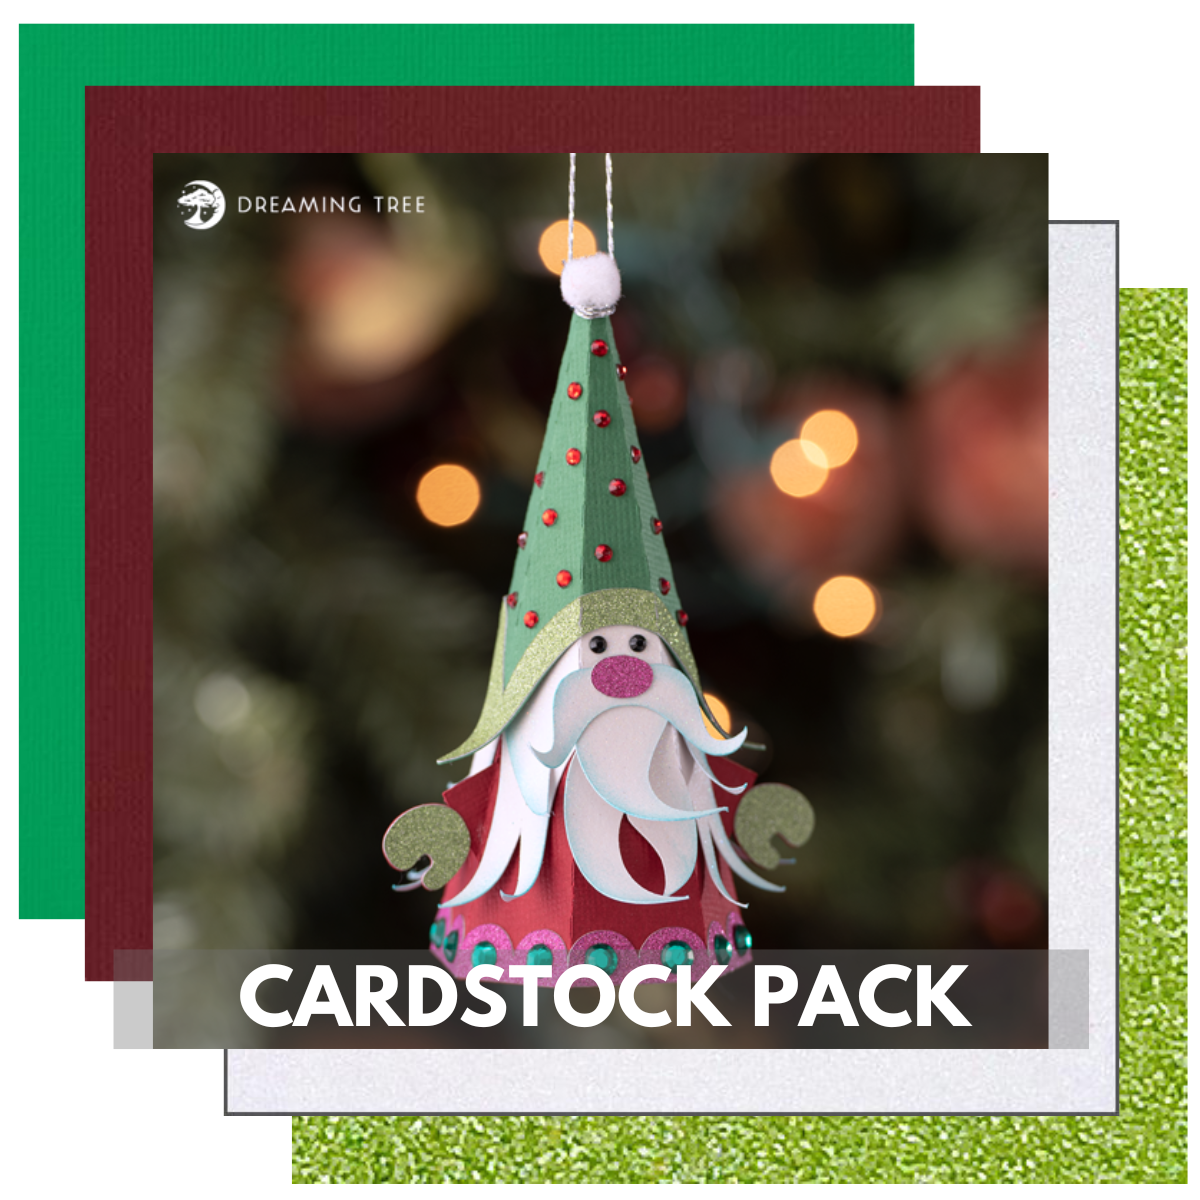 Gnome Ornament Cardstock Kit from Dreaming Tree